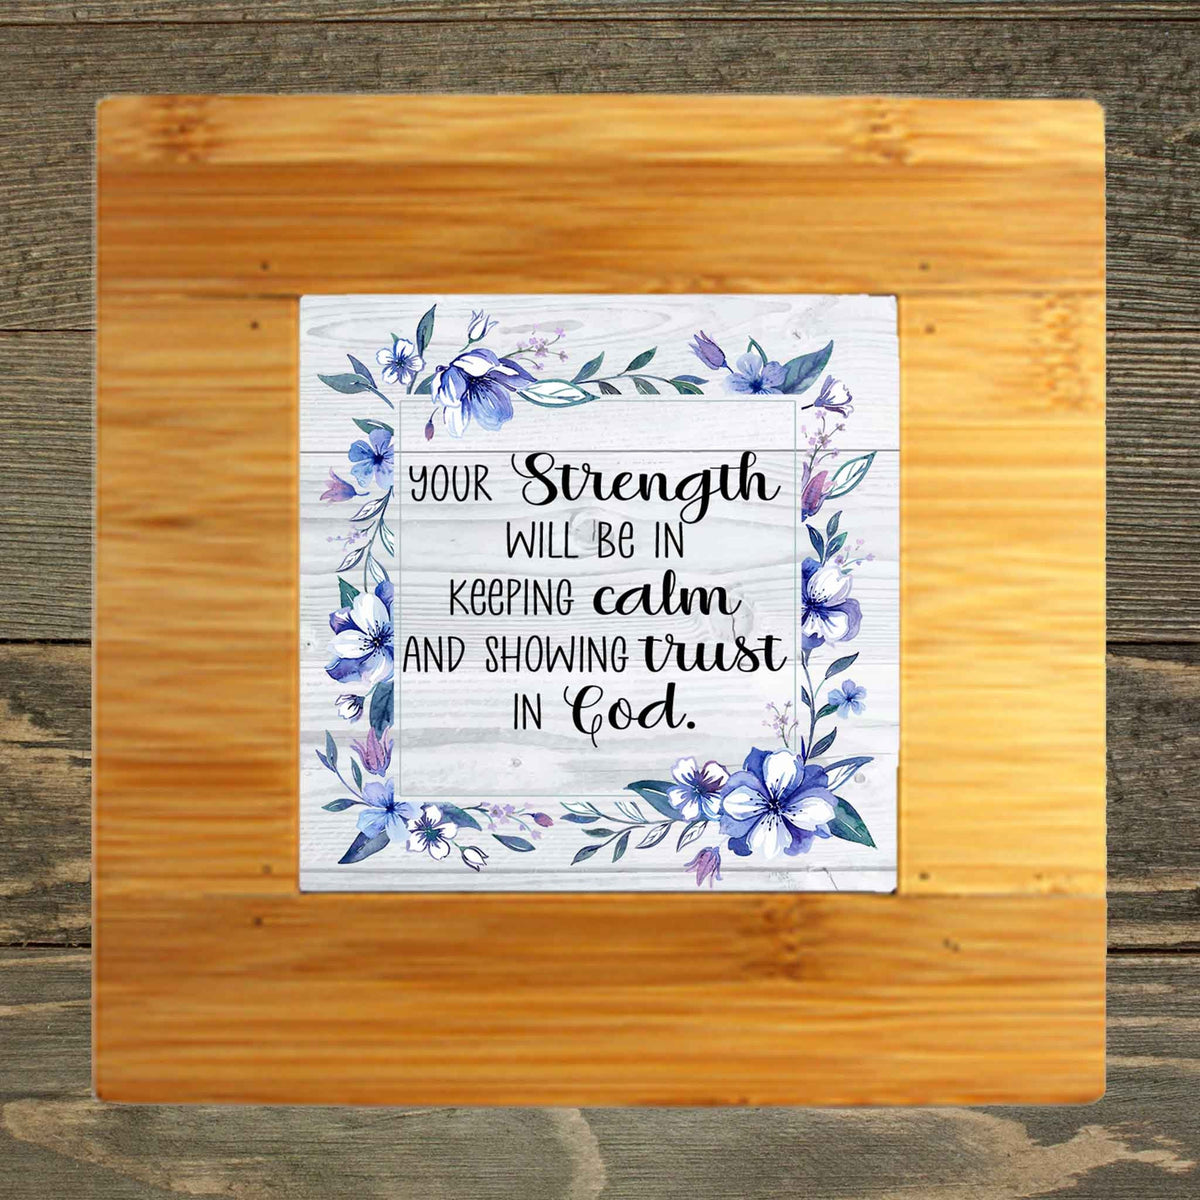 Personalized Iron Trivet | Custom Kitchen Gifts | Strength in God